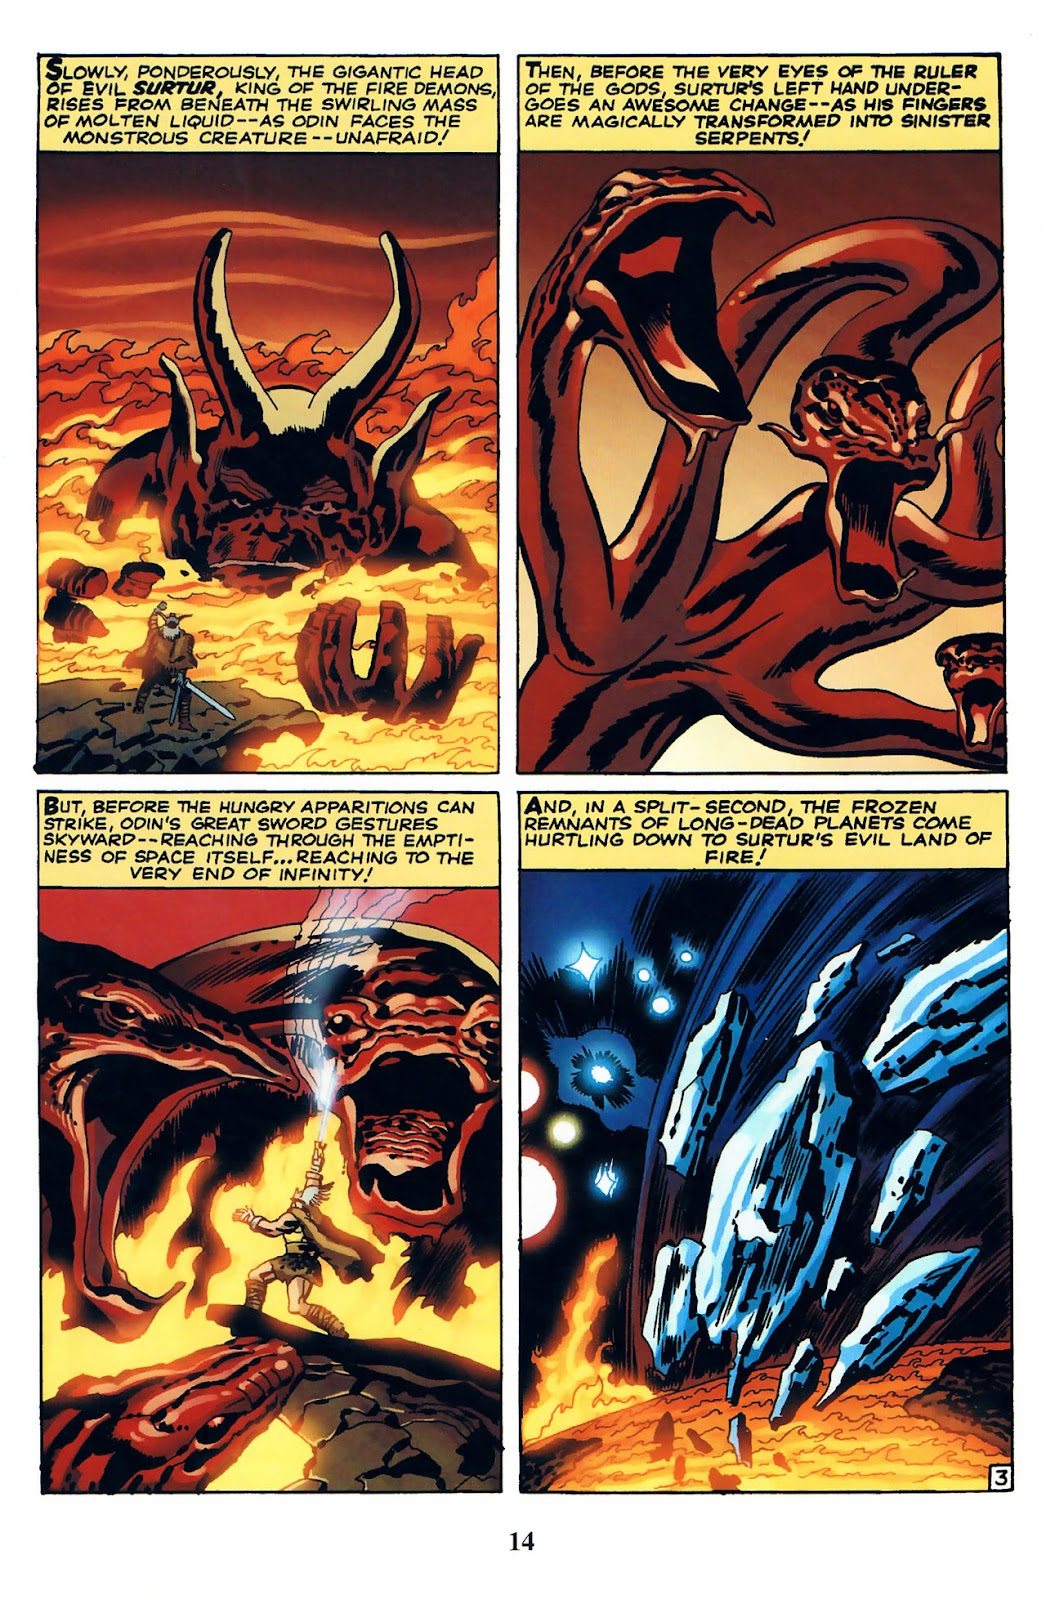 Thor: Tales of Asgard by Stan Lee & Jack Kirby issue 1 - Page 16